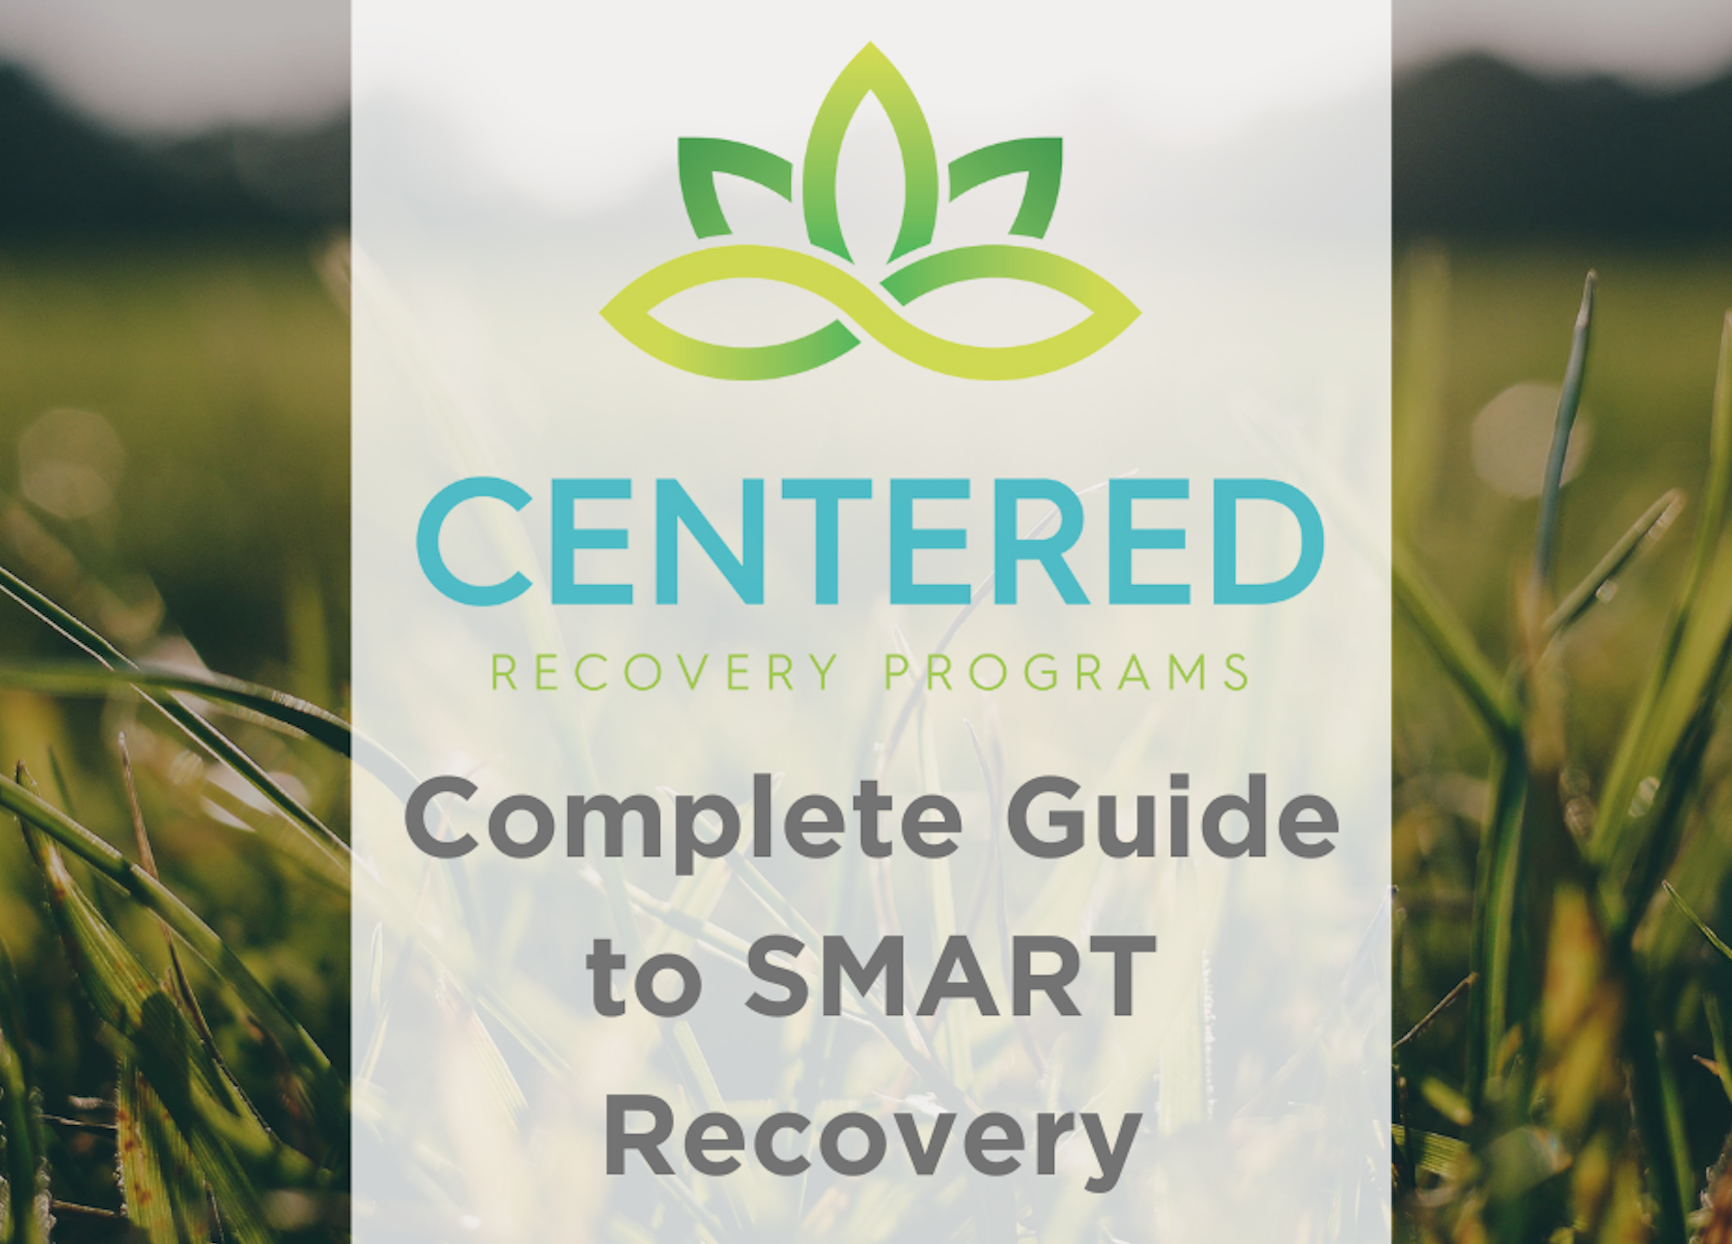 The Complete Guide to SMART Recovery